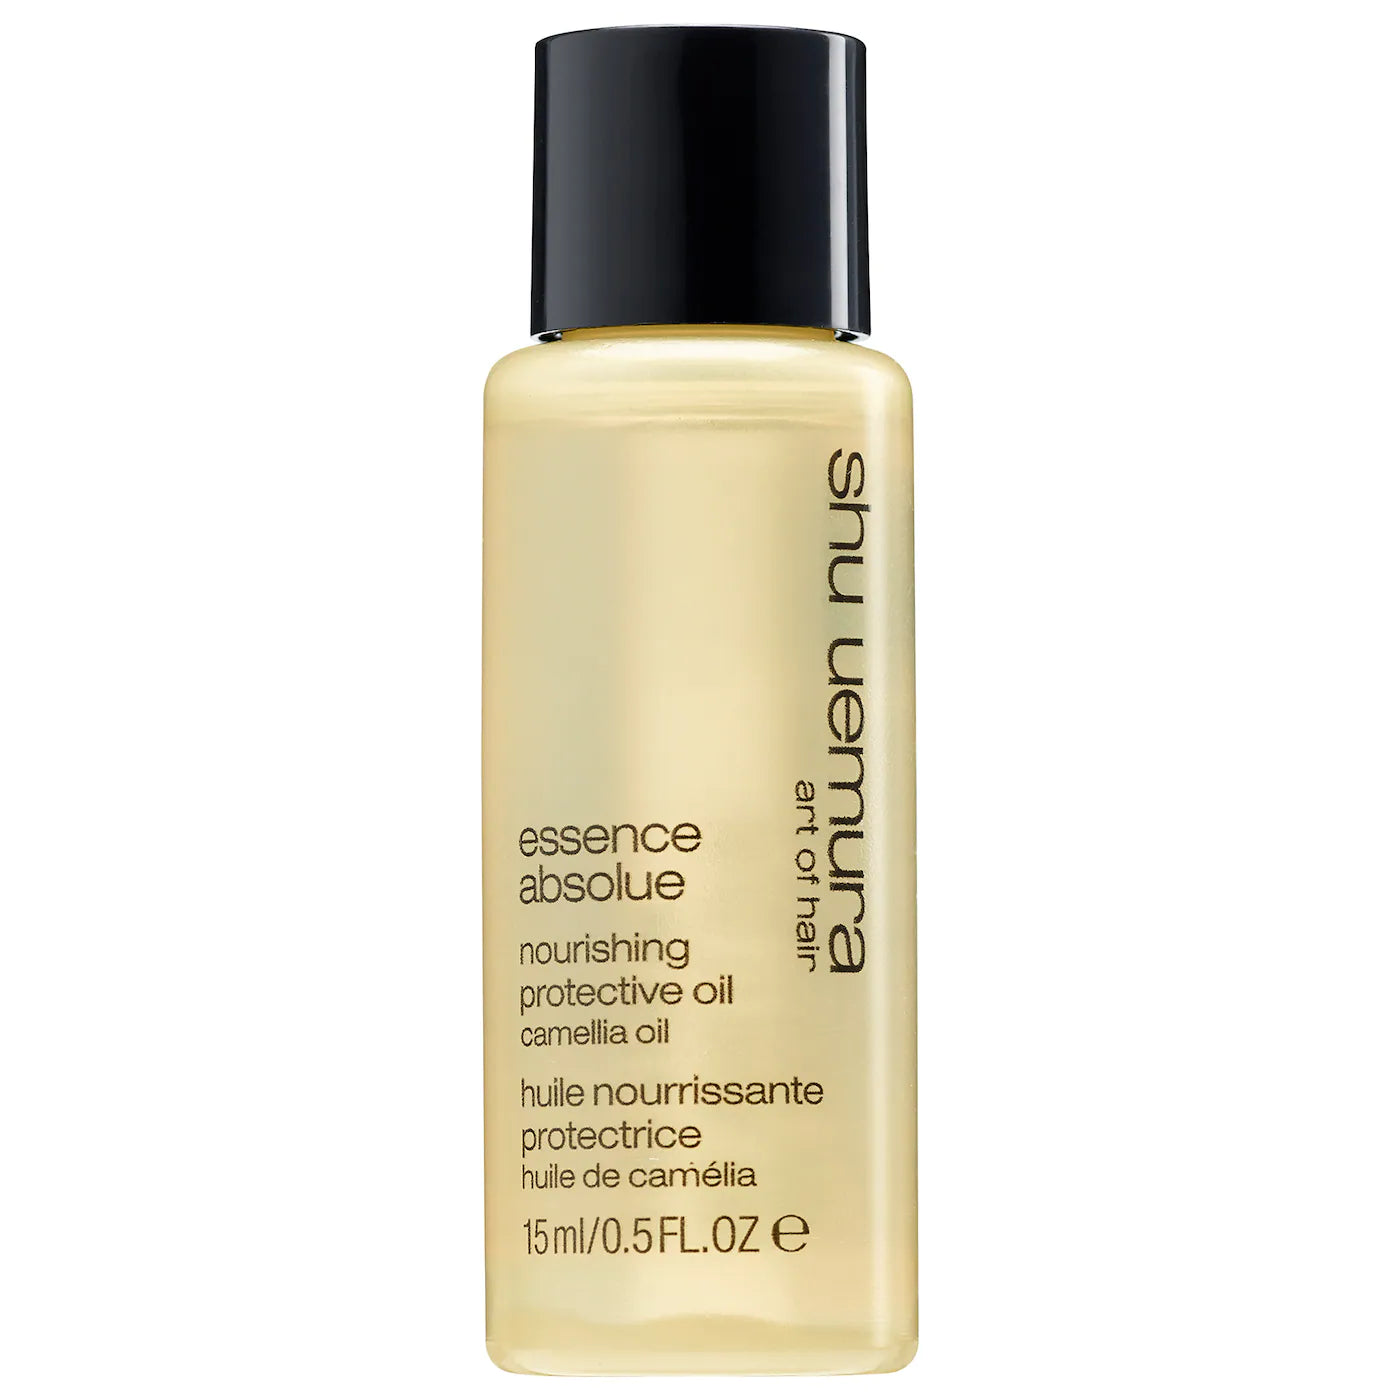 Essence Absolue Nourishing Protective Oil trial size